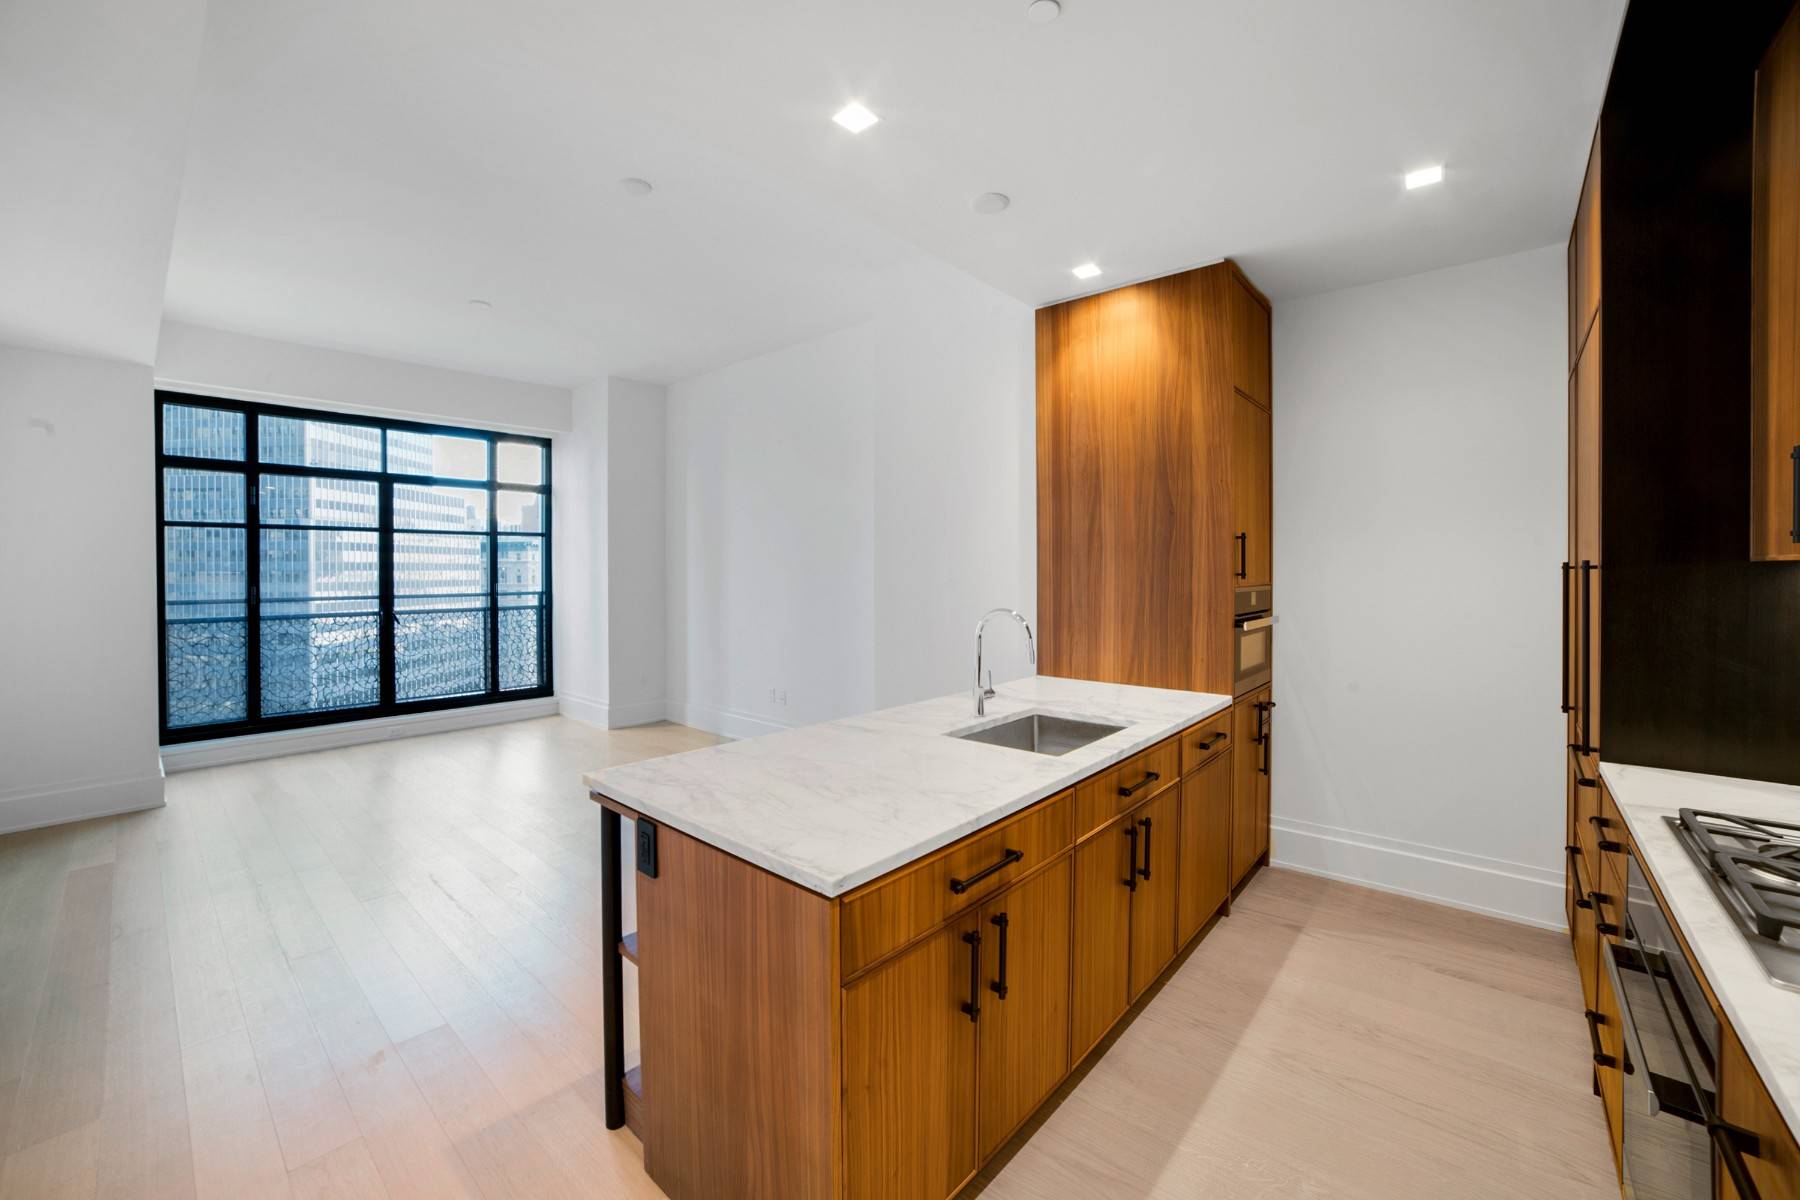 Incredible opportunity to reside in one of Downtown's most iconic New Development buildings.